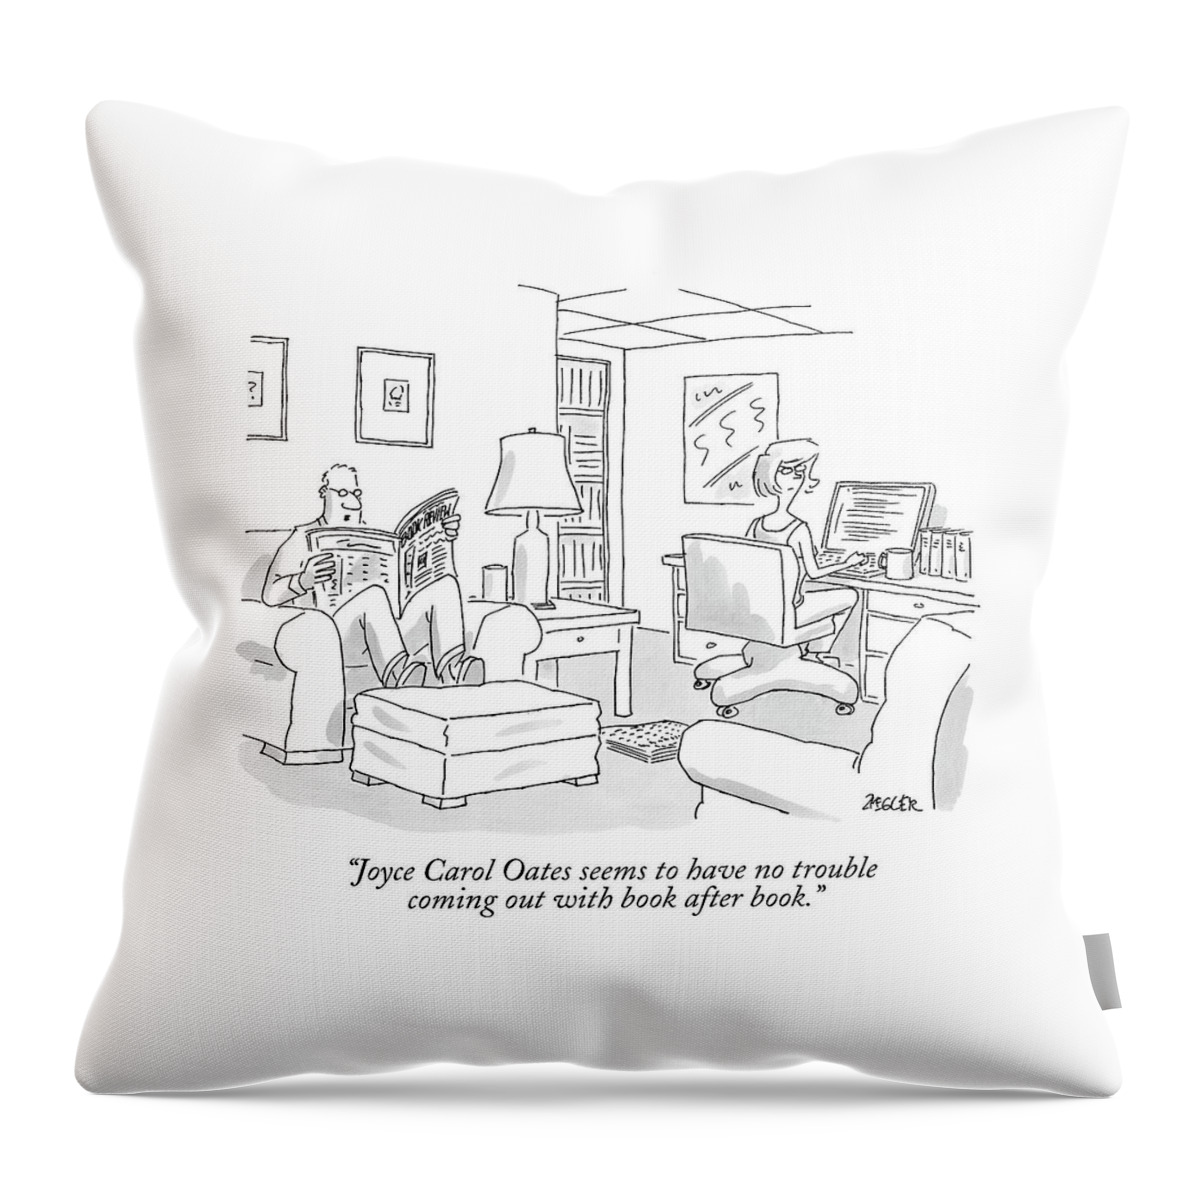 Joyce Carol Oates Seems To Have No Trouble Coming Throw Pillow